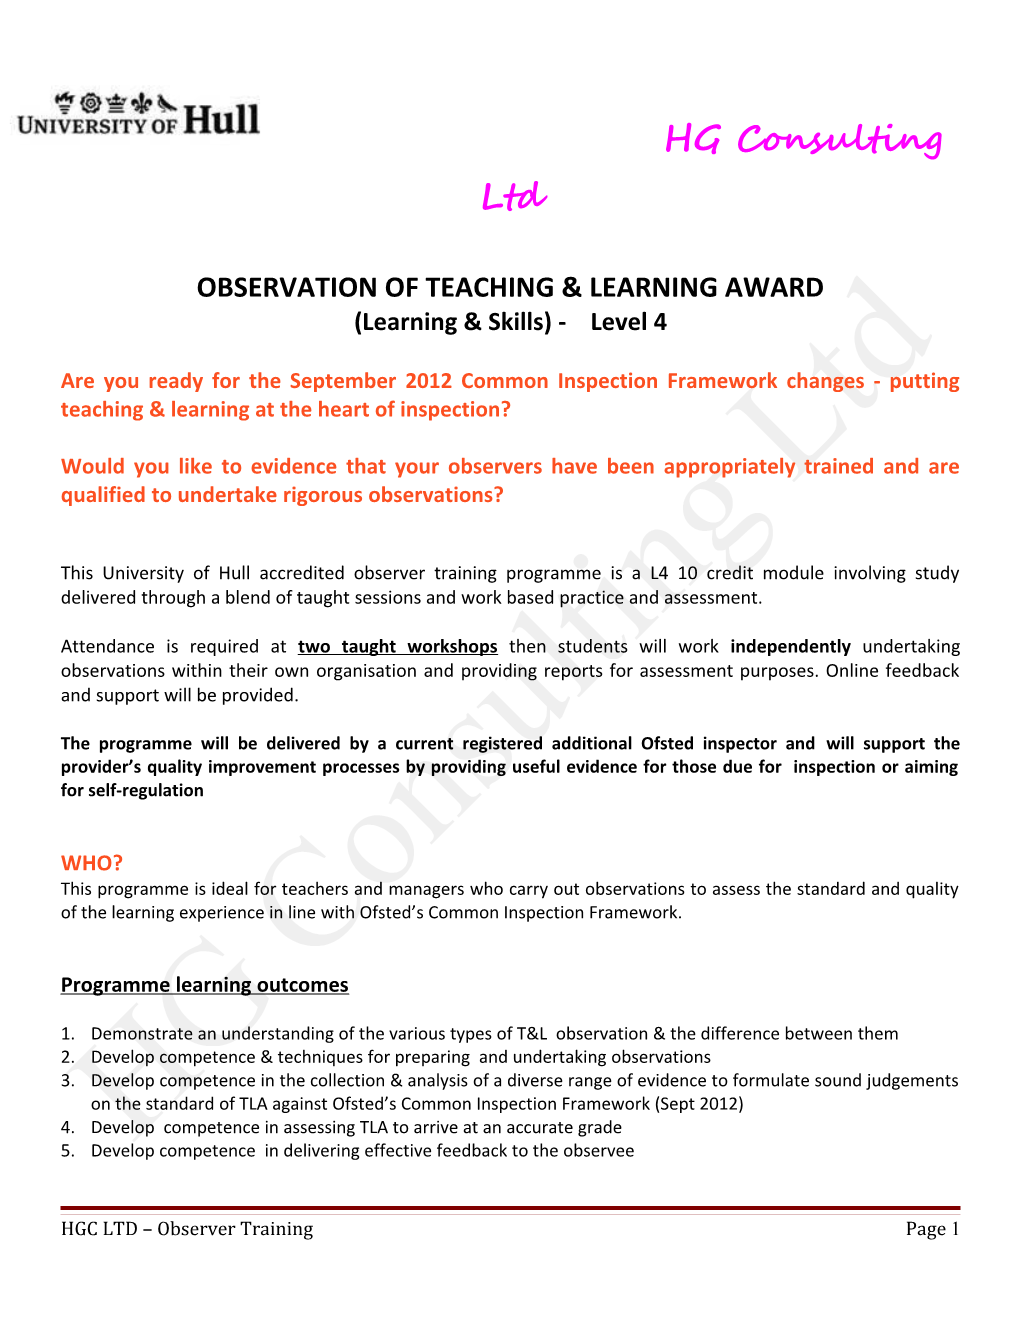 OBSERVATION of TEACHING & LEARNING AWARD - (Learning & Skills)